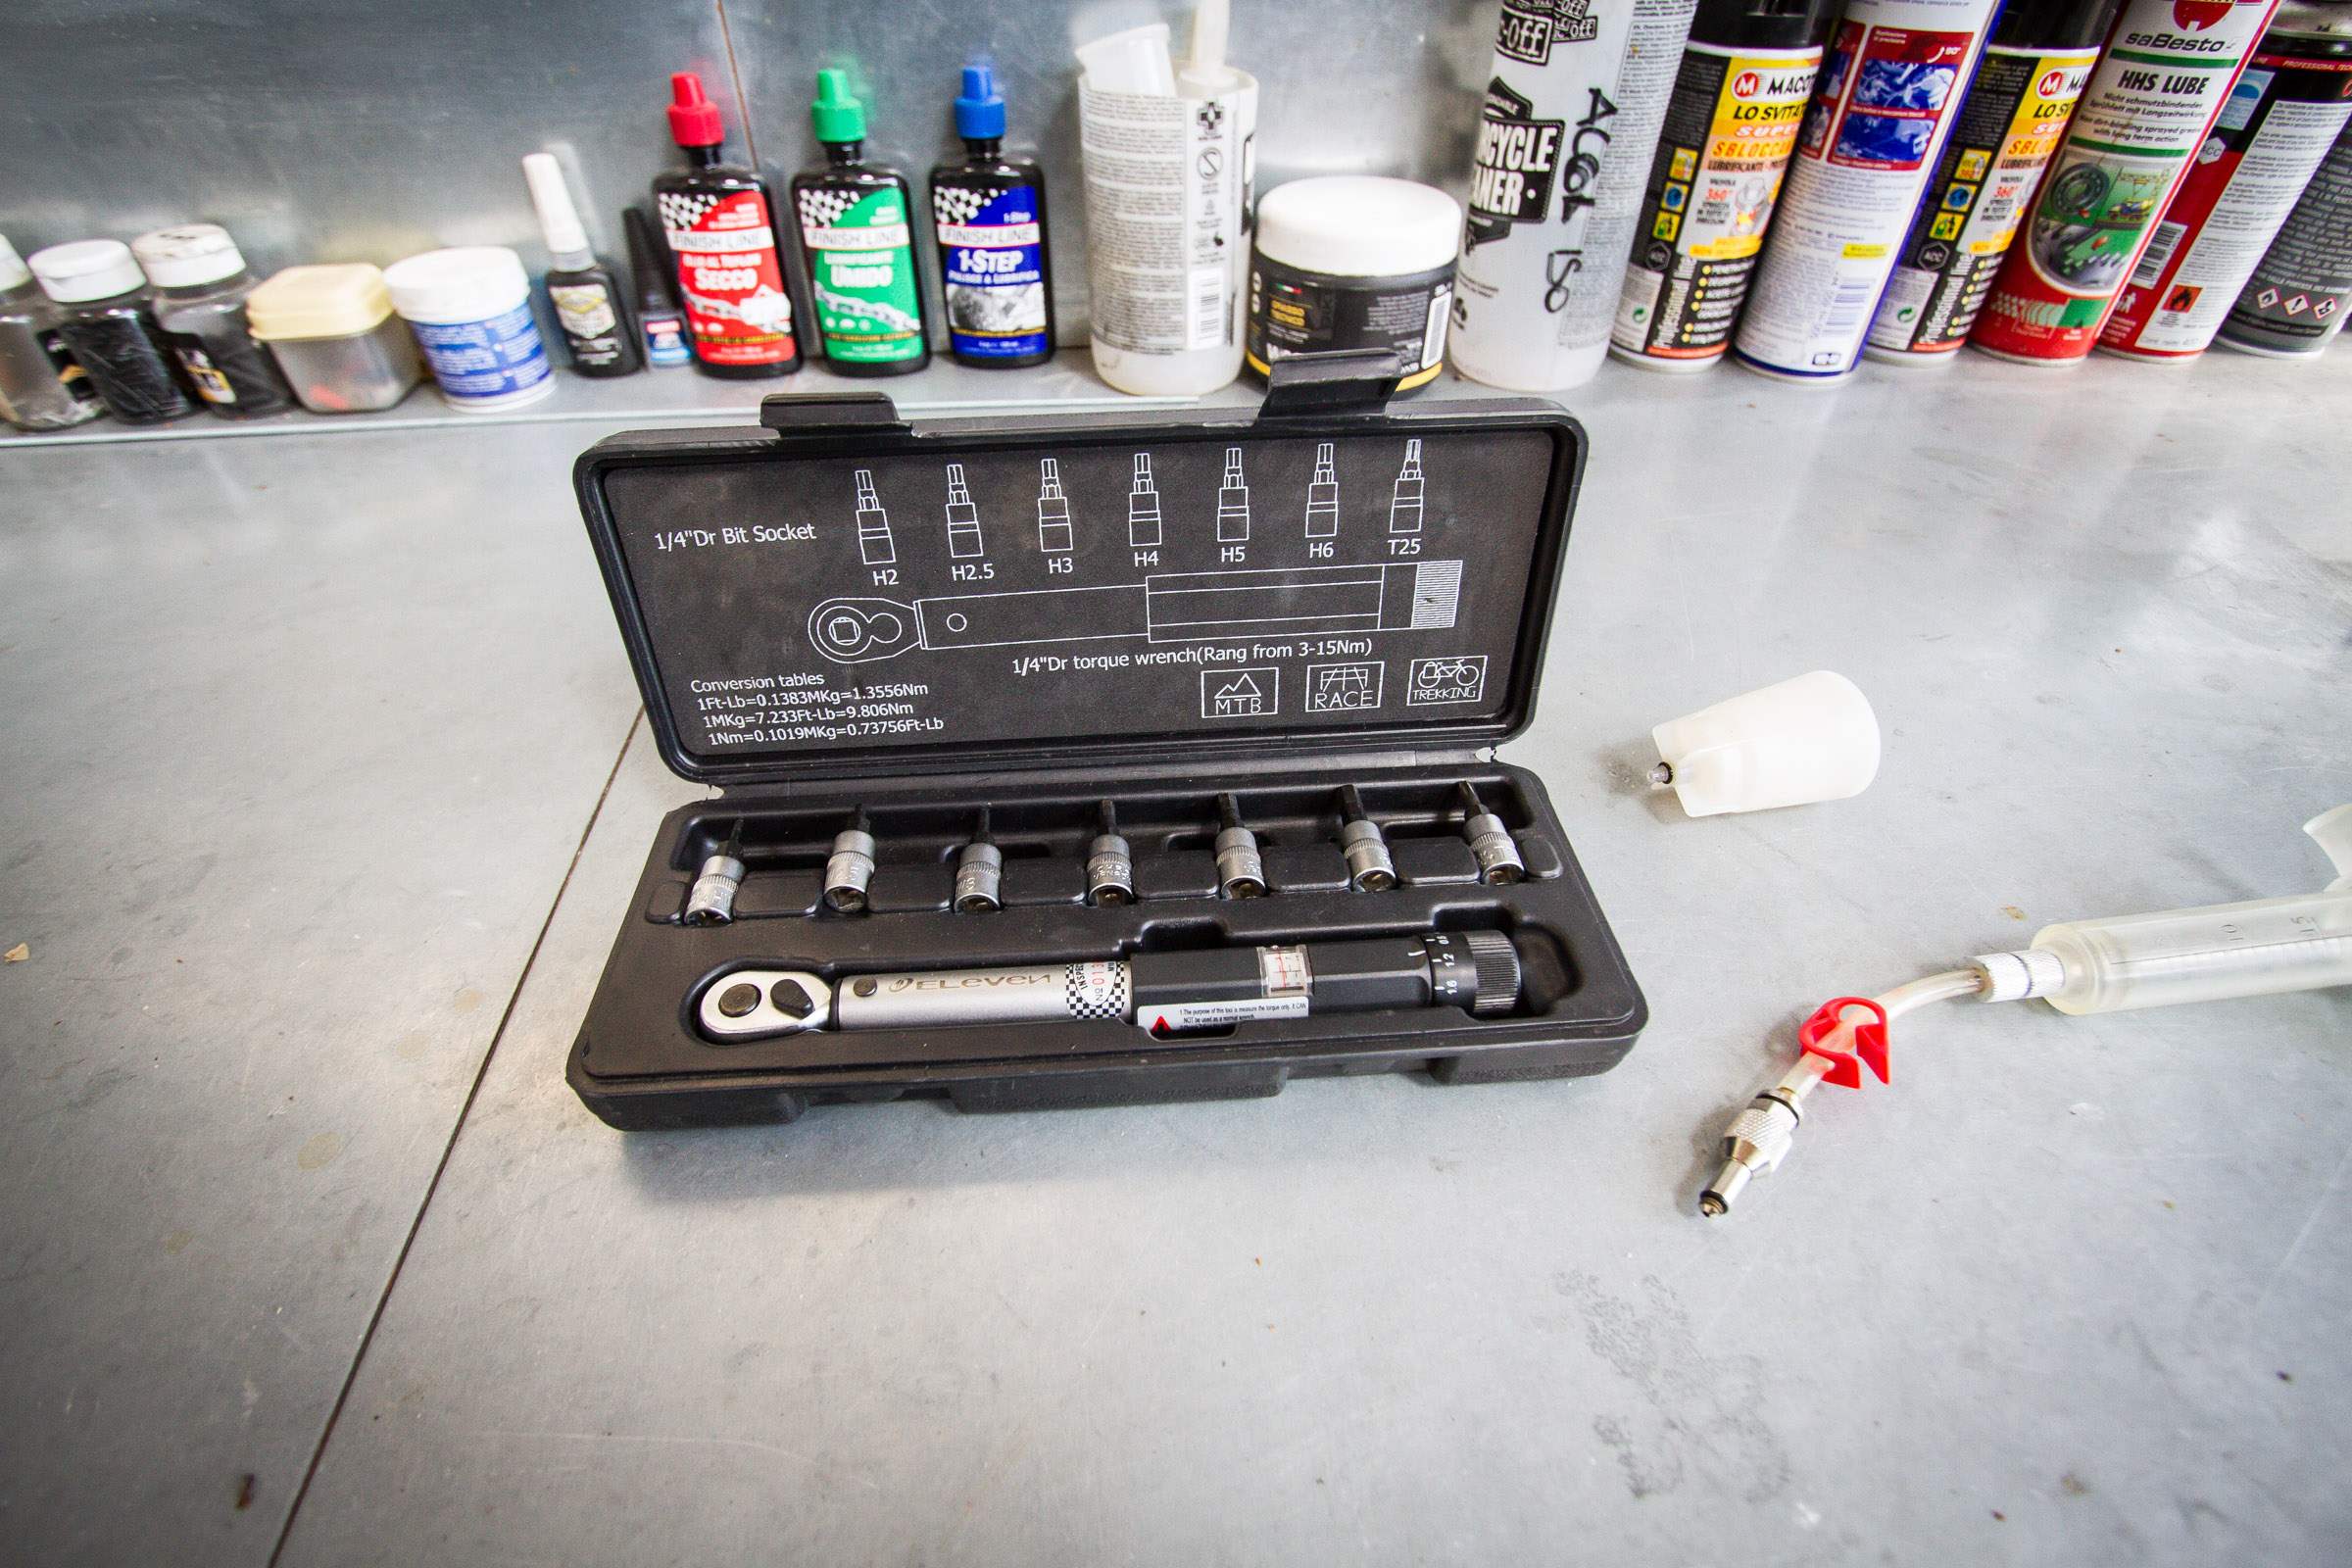 A Torque wrench, this is a very important tool for all budding racers to own. Over-tightening bolts can be as bad as under-tightening, risking damaging parts.